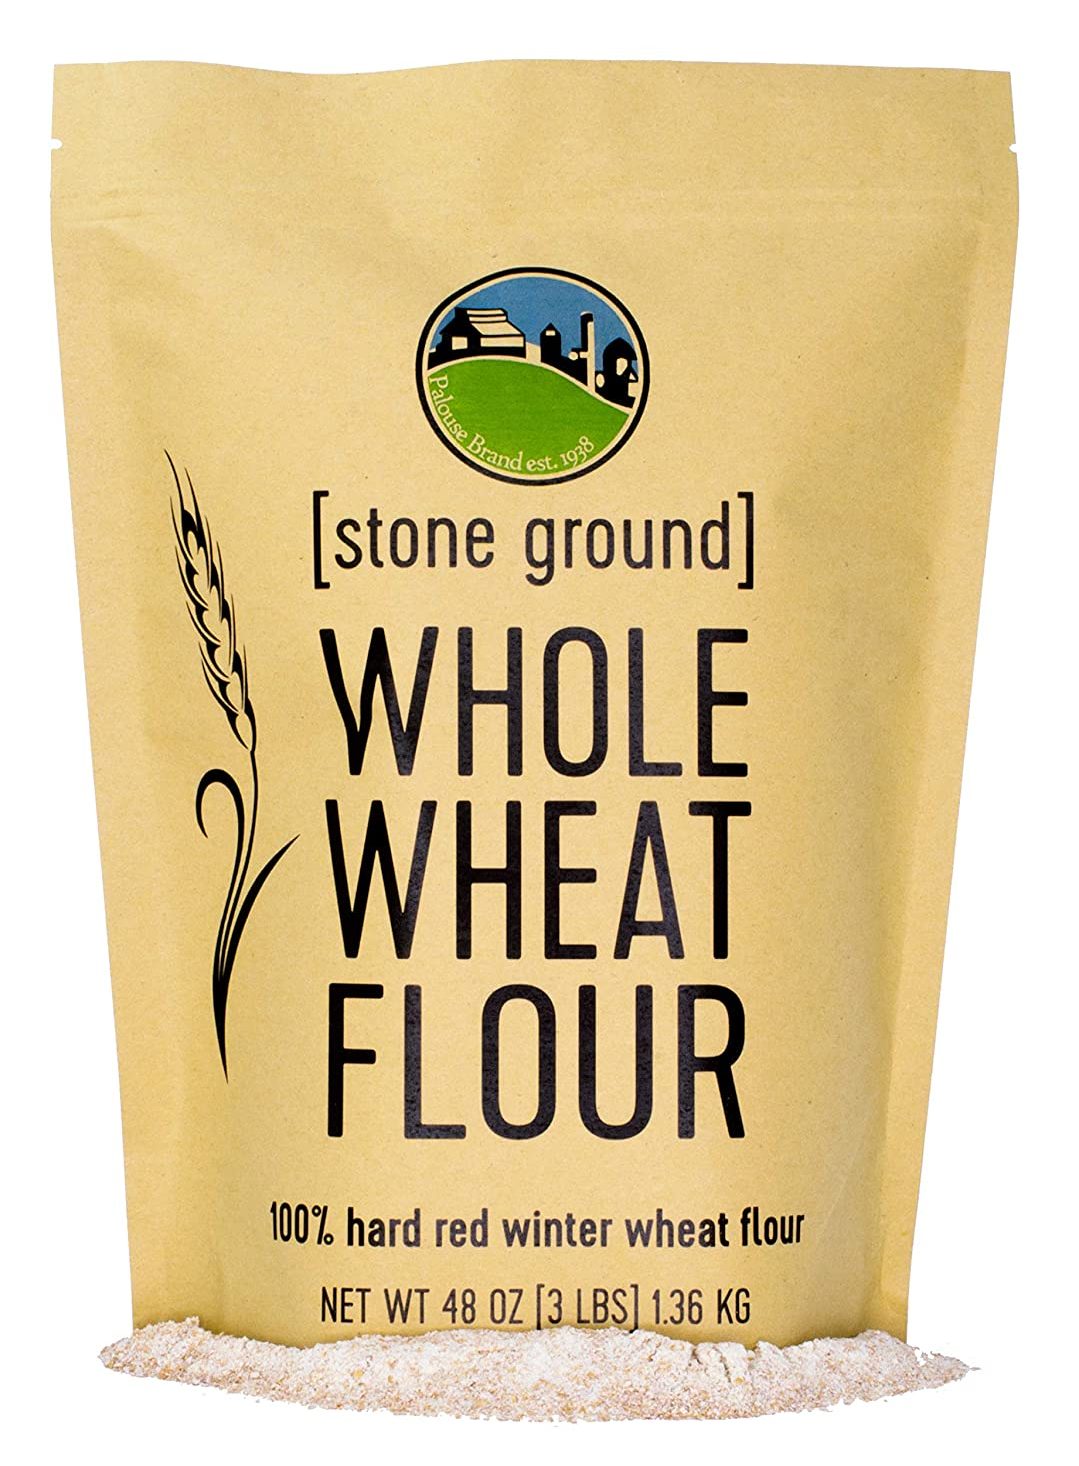 Another healthy alternative to all-purpose flour is whole wheat flour.